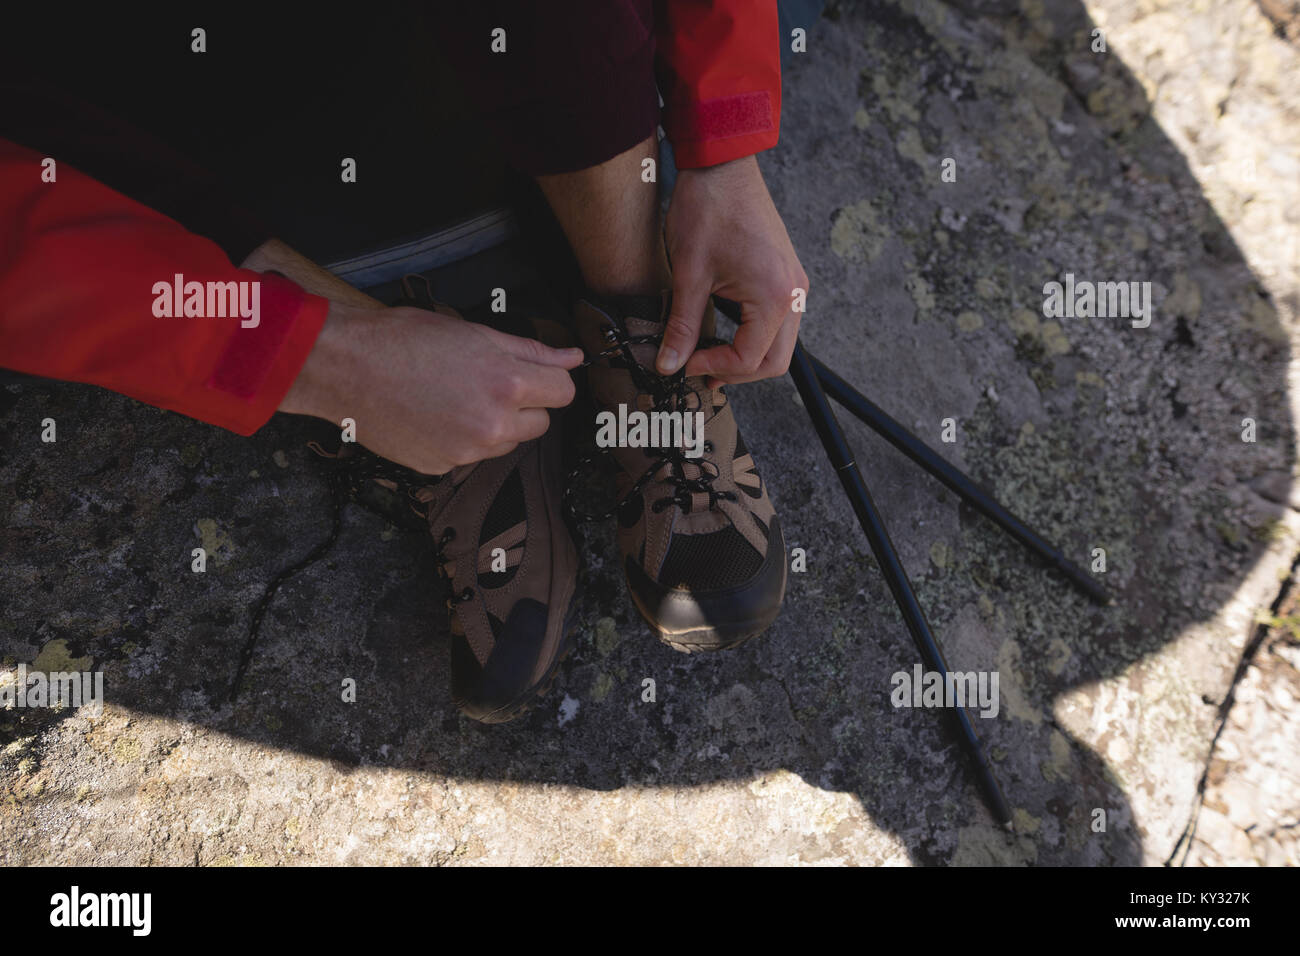 Hiker tying shoes lace on a sunny day Stock Photo